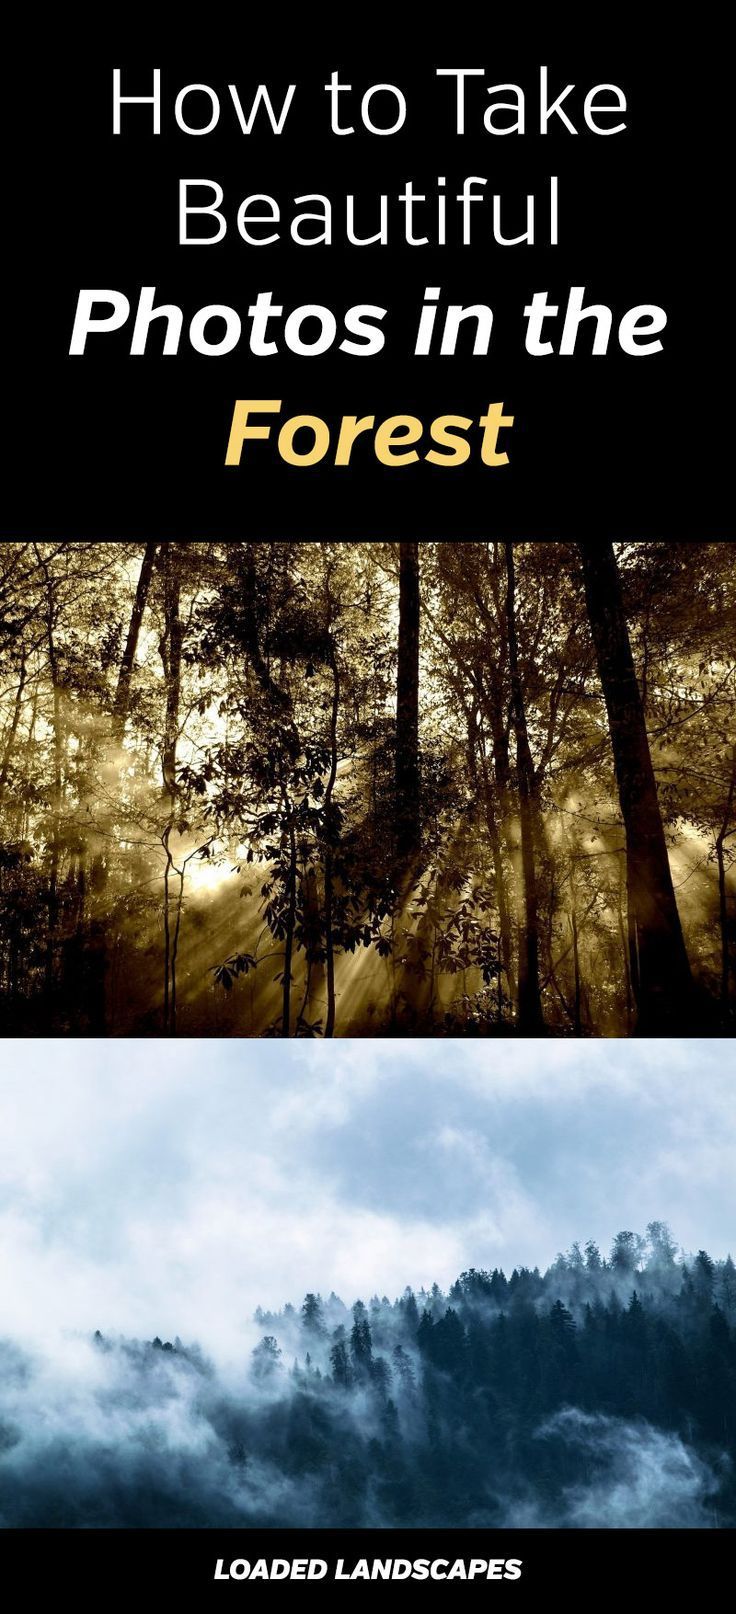 How to Take Beautiful Photos in the Forest - How to Take Beautiful Photos in the Forest -   17 beauty Images amazing photos ideas